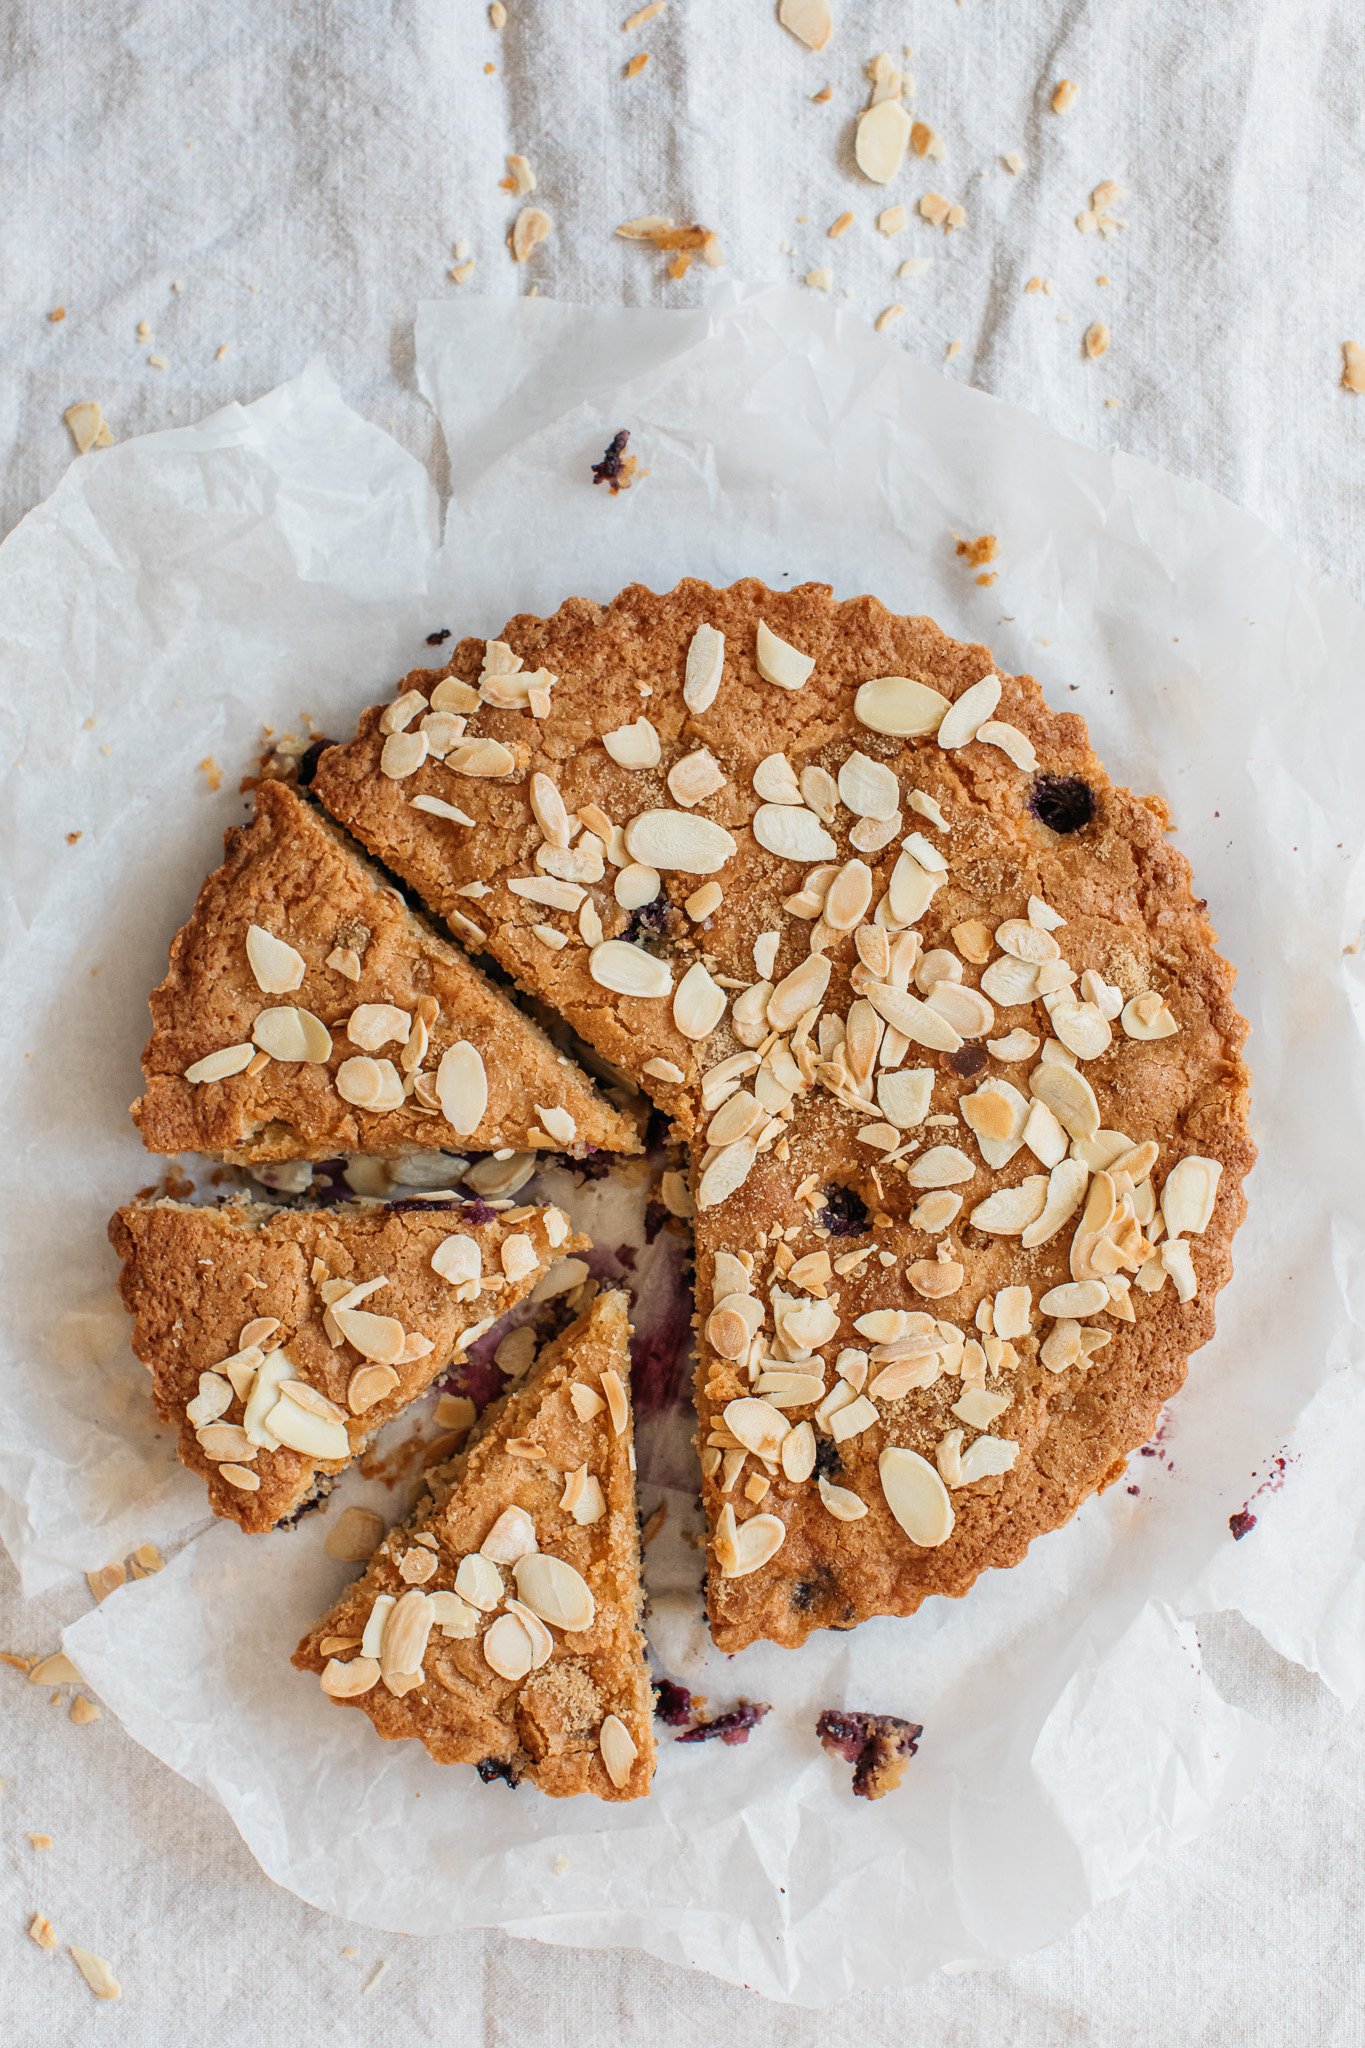 Low FODMAP blueberry cake with flaked almonds